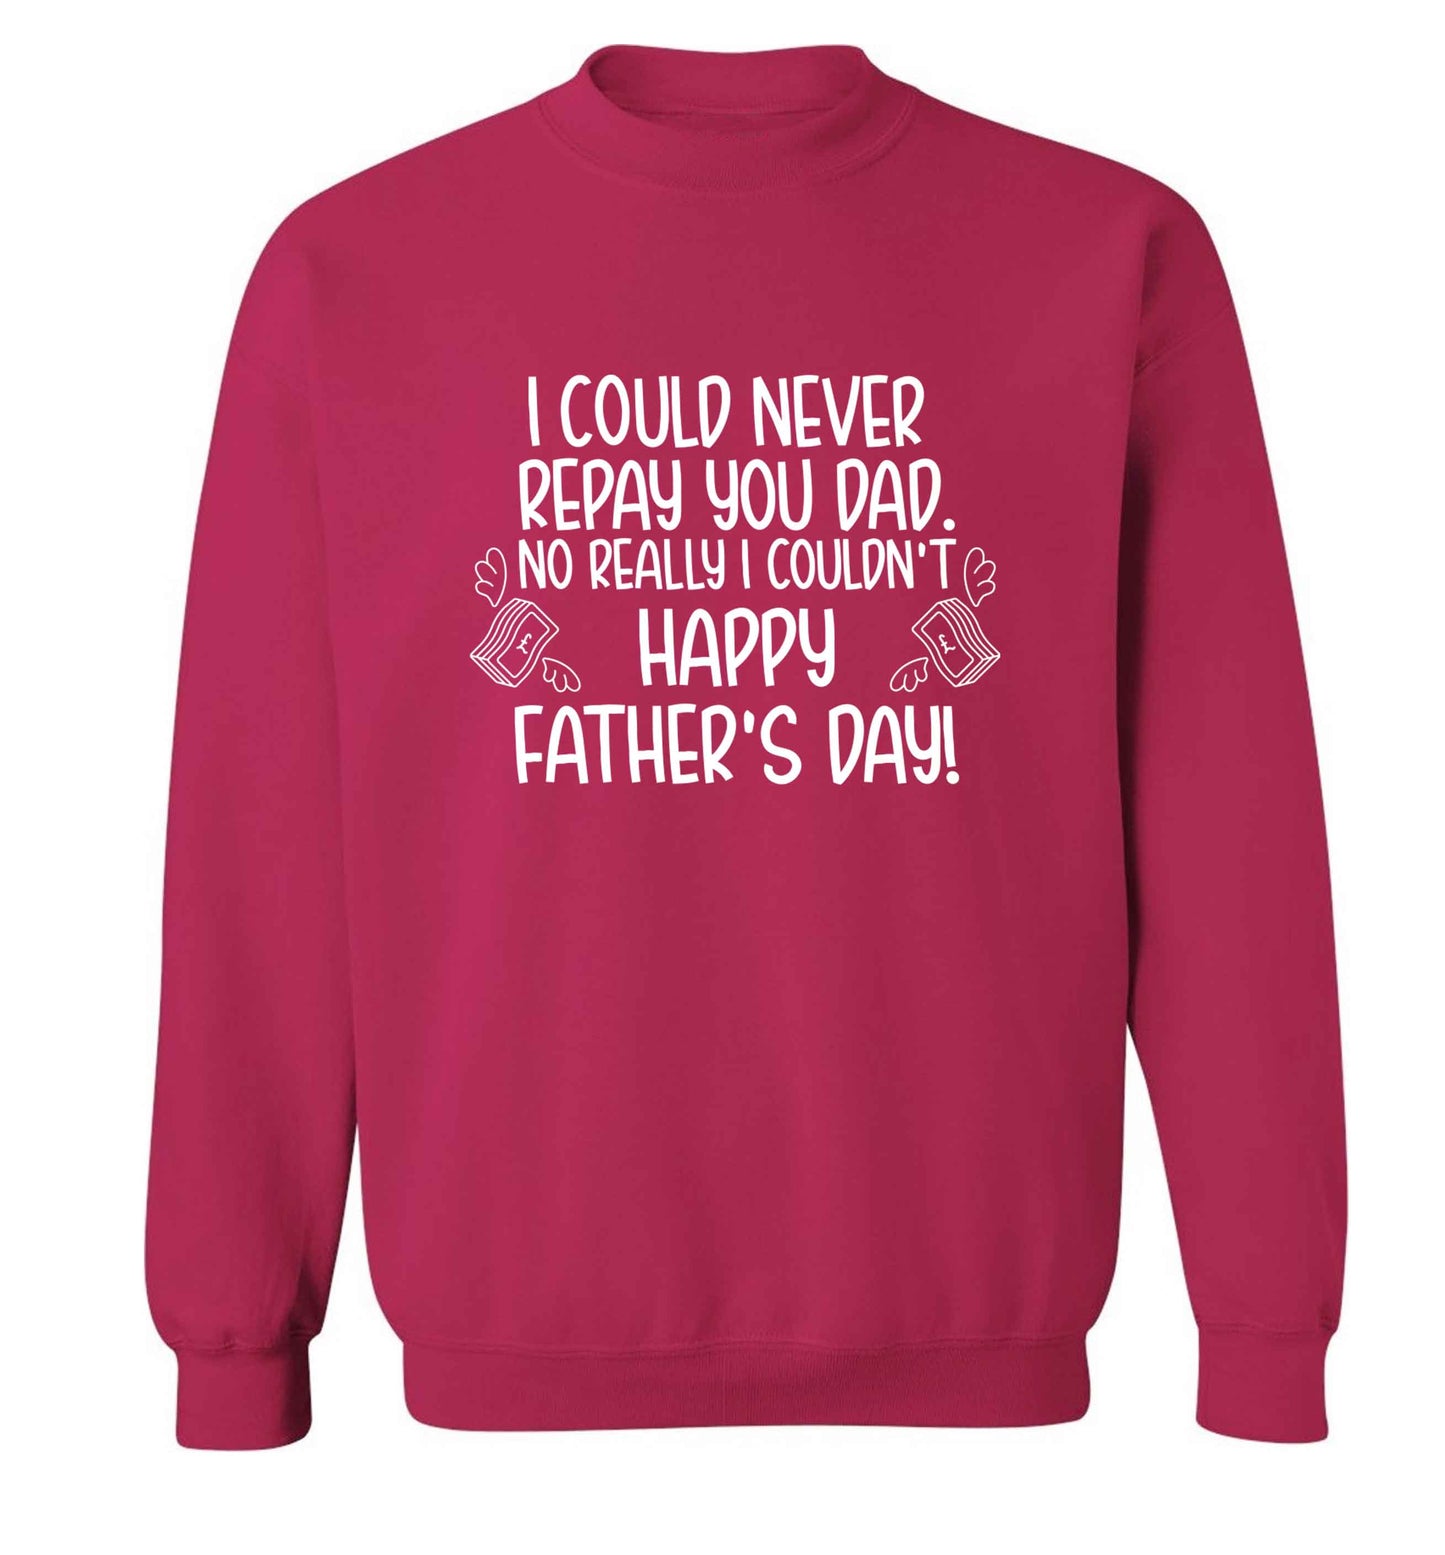 I could never repay you dad. No I really couldn't happy Father's day! adult's unisex pink sweater 2XL